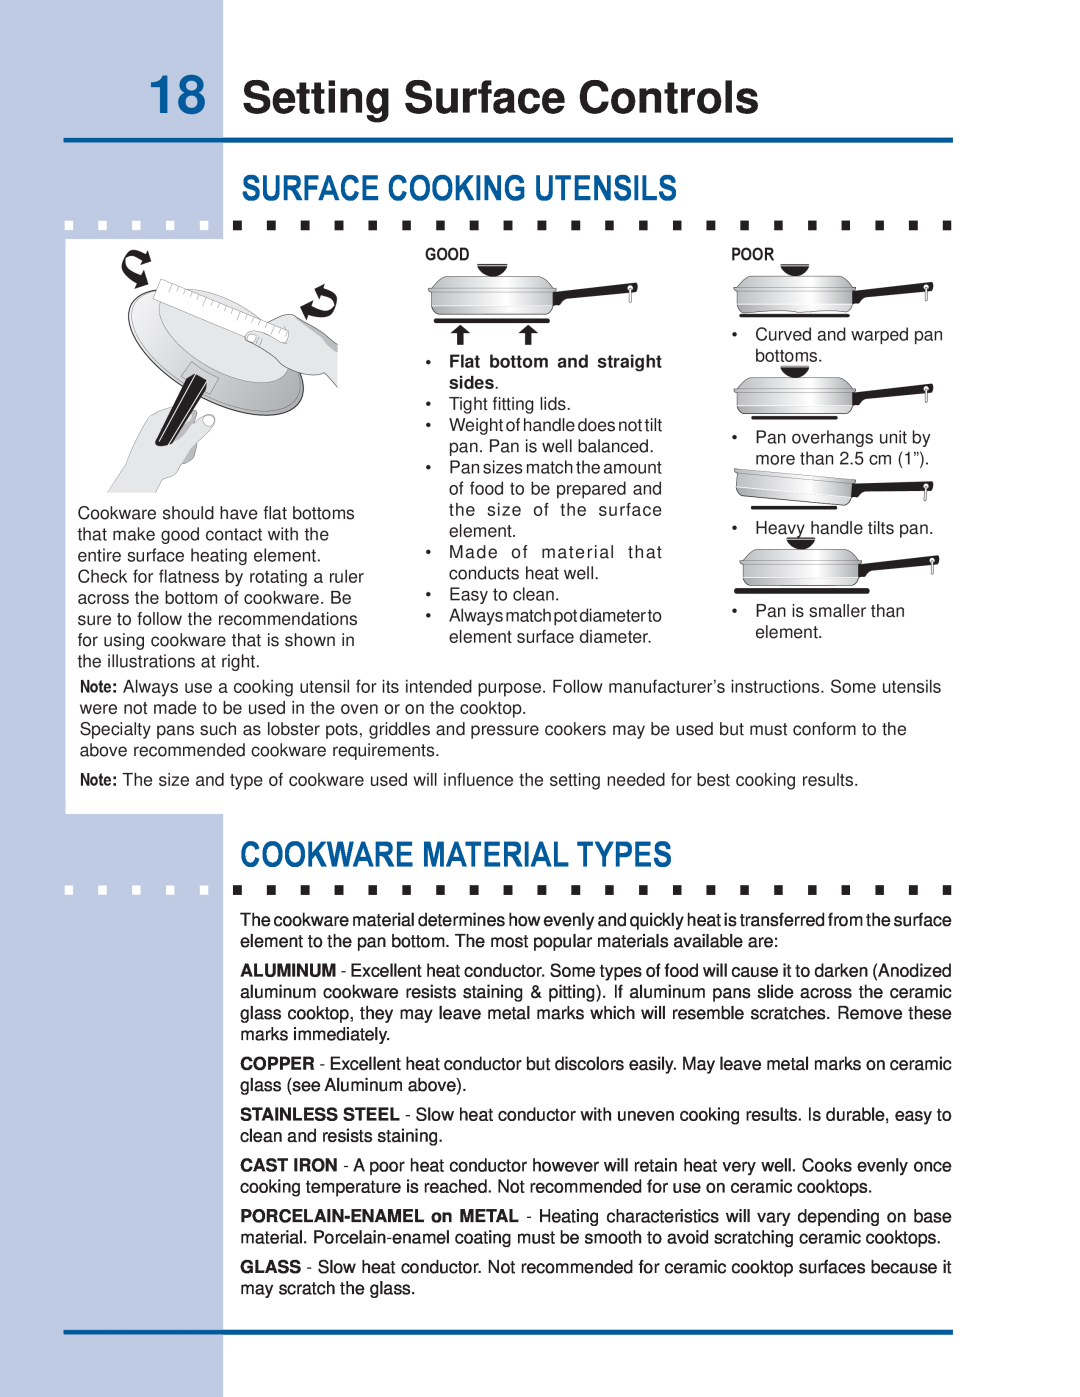 Electrolux EI30ES55JS manual Setting Surface Controls, Surface Cooking Utensils, Cookware Material Types 